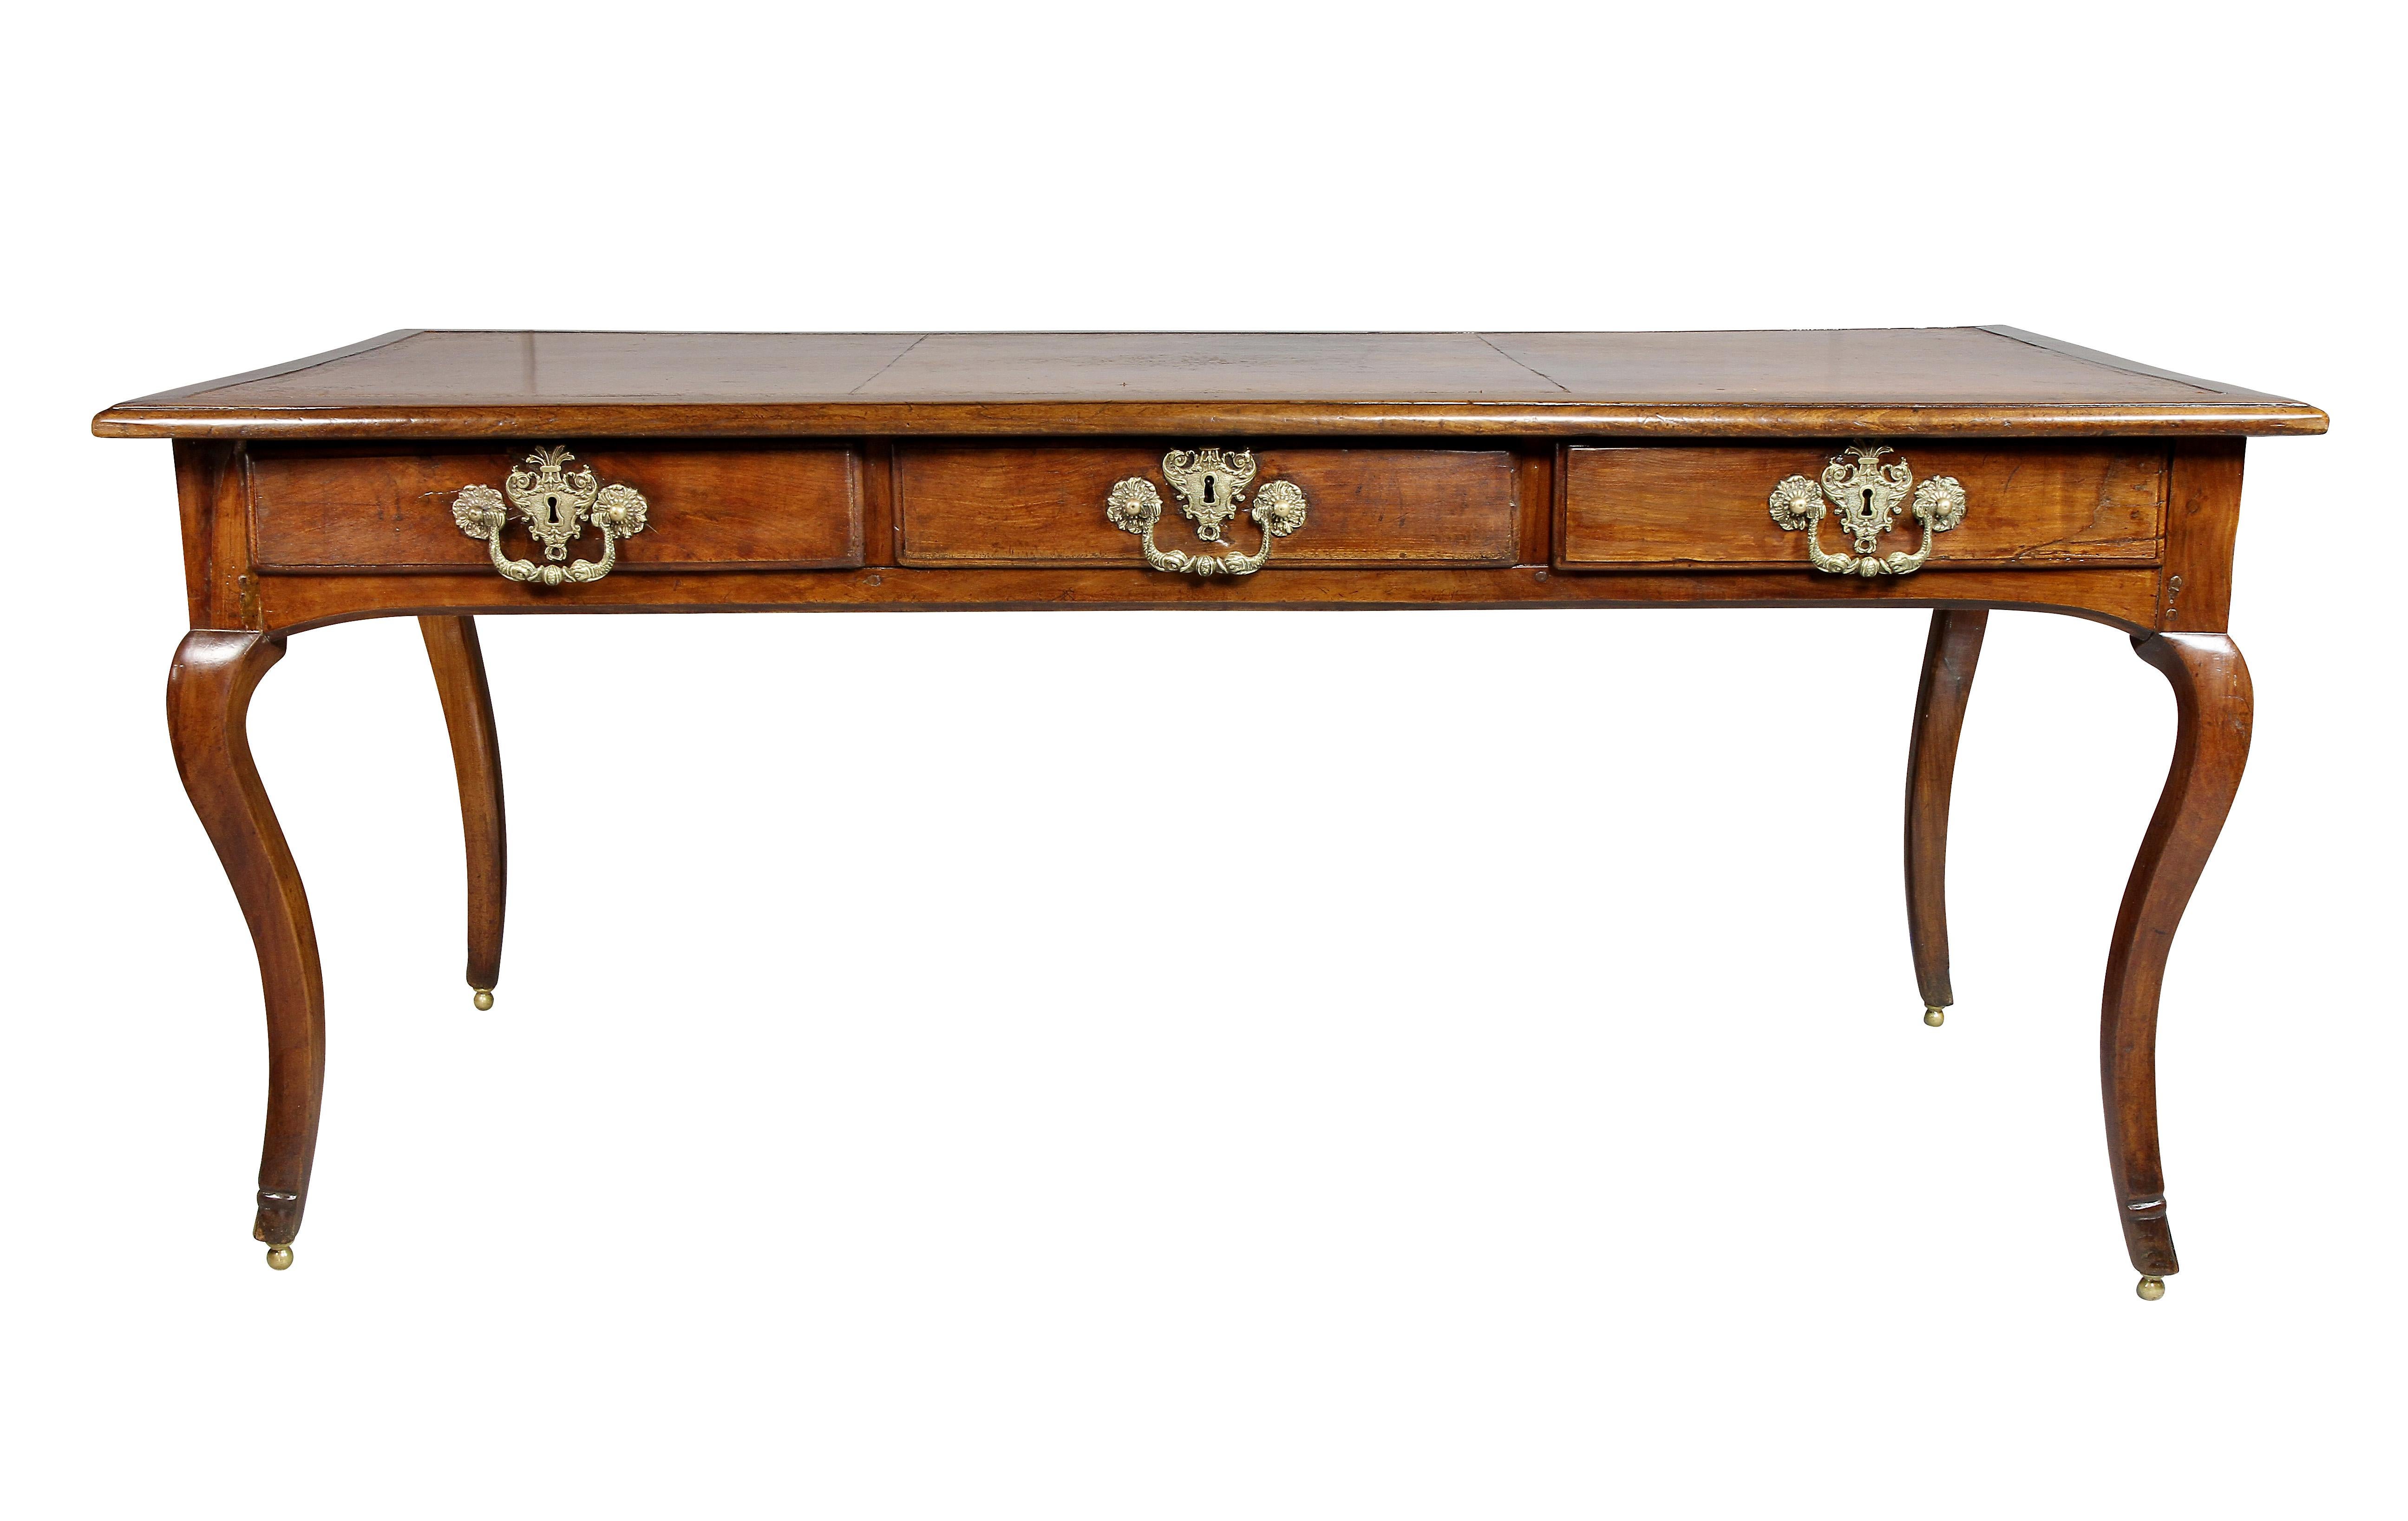 Rectangular top with original tooled brown leather with distressed sections over three drawers with elaborate bronze handles and false opposing drawers, raised on cabriole legs and brass ball feet.